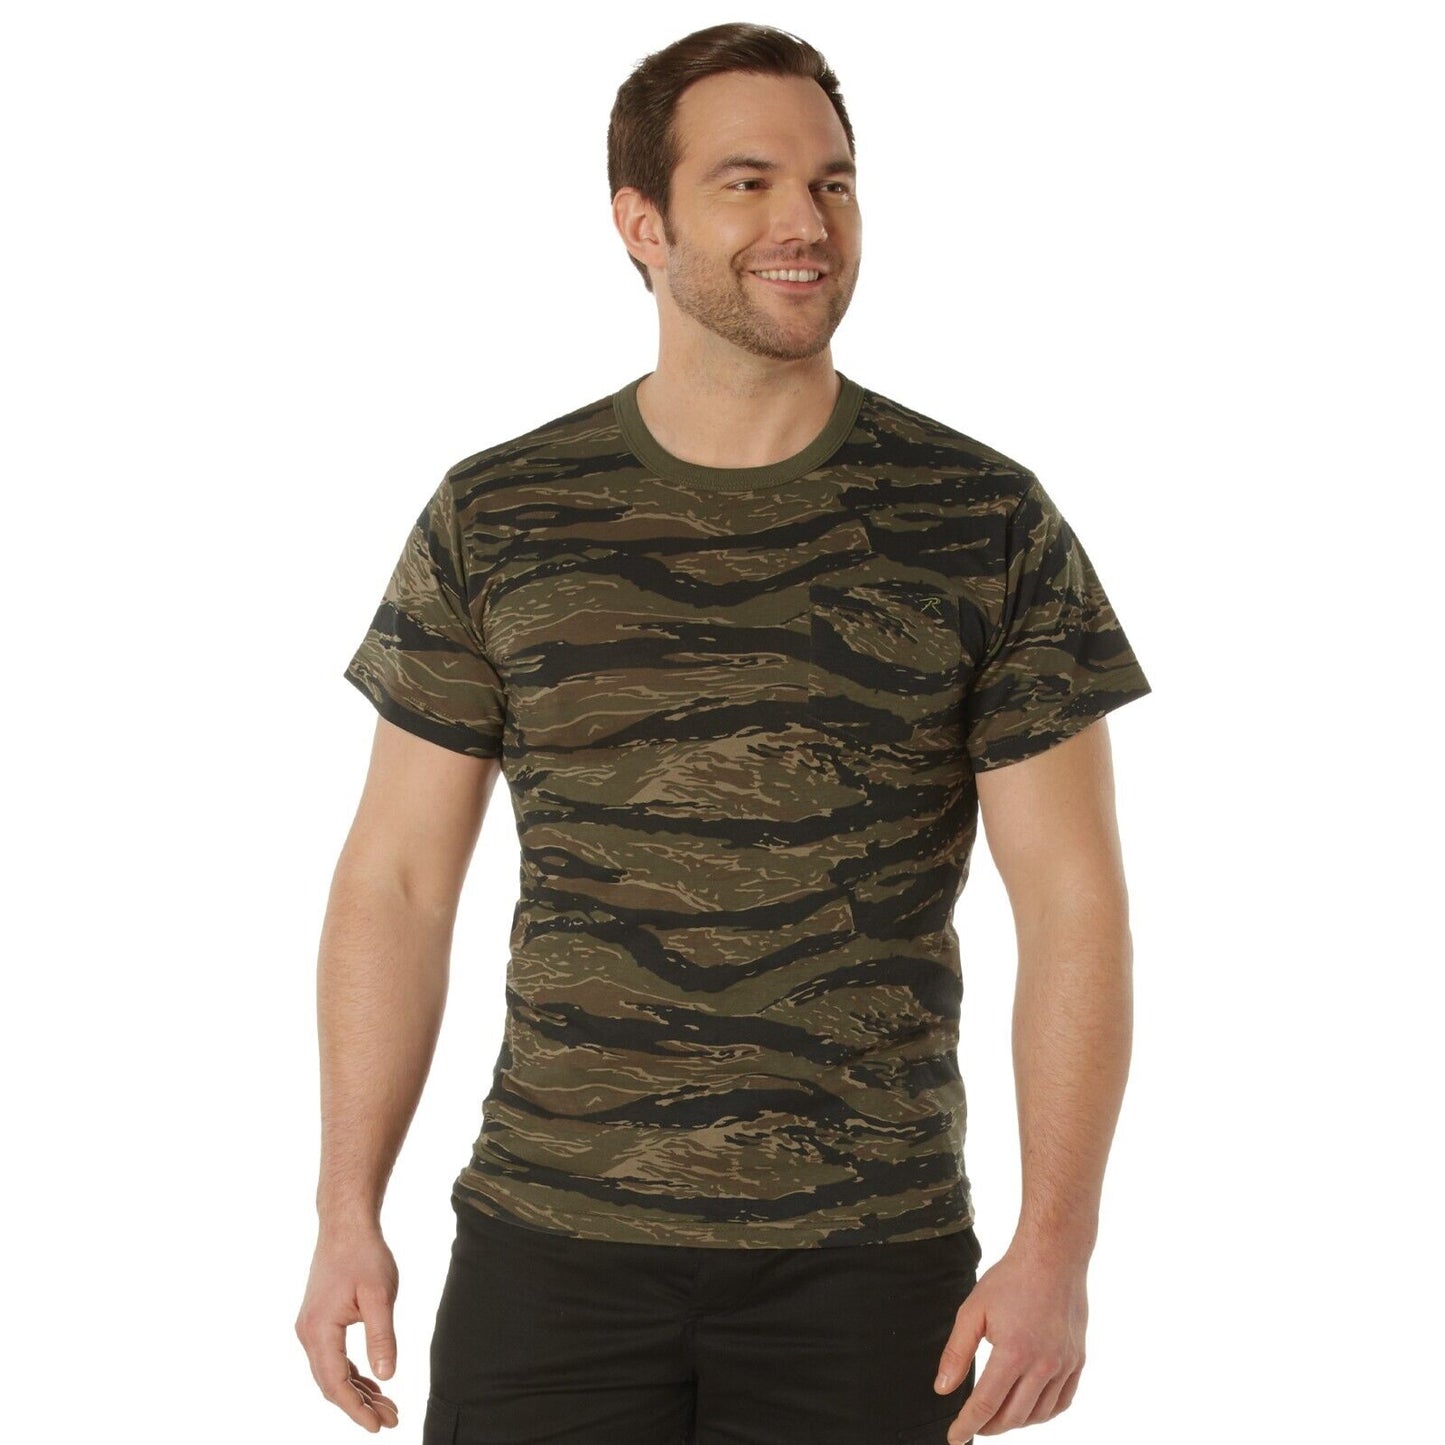 Rothco Men's Moisture Wicking T-Shirt 100% Polyester Tee with Pocket